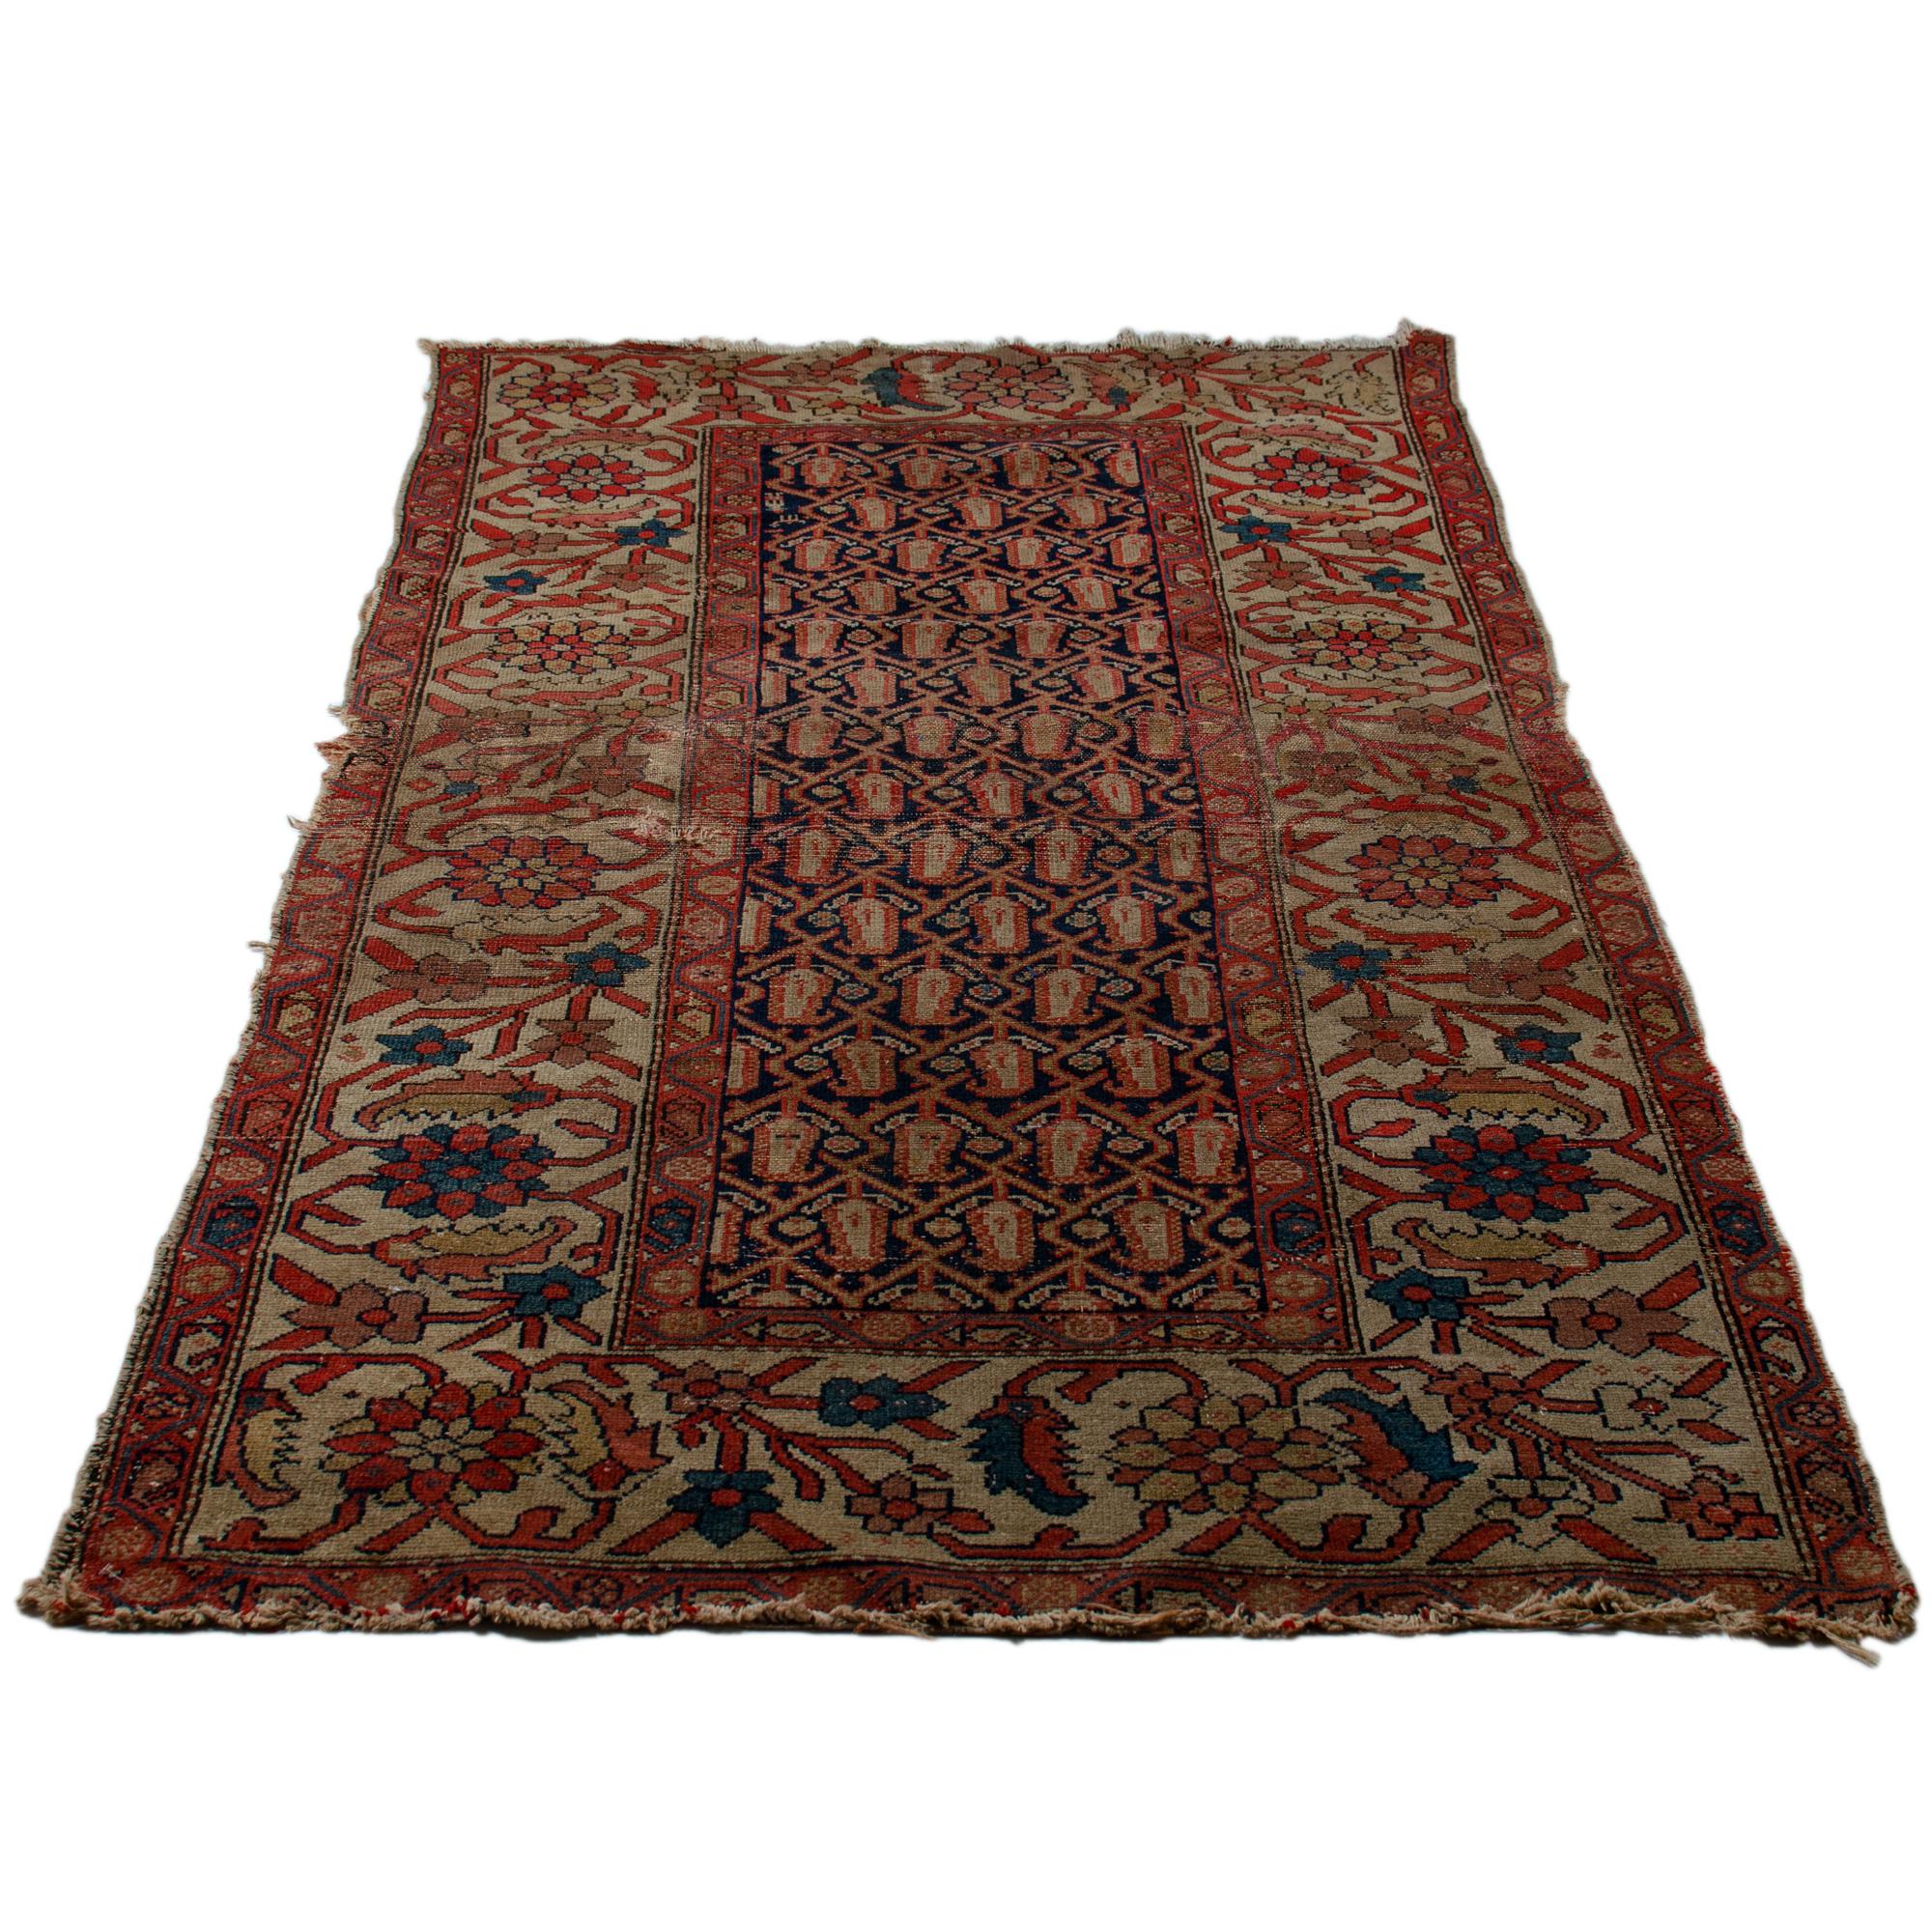 A tribal Northwest Persian rug, late 19th century.

3’10.5” by 7’7